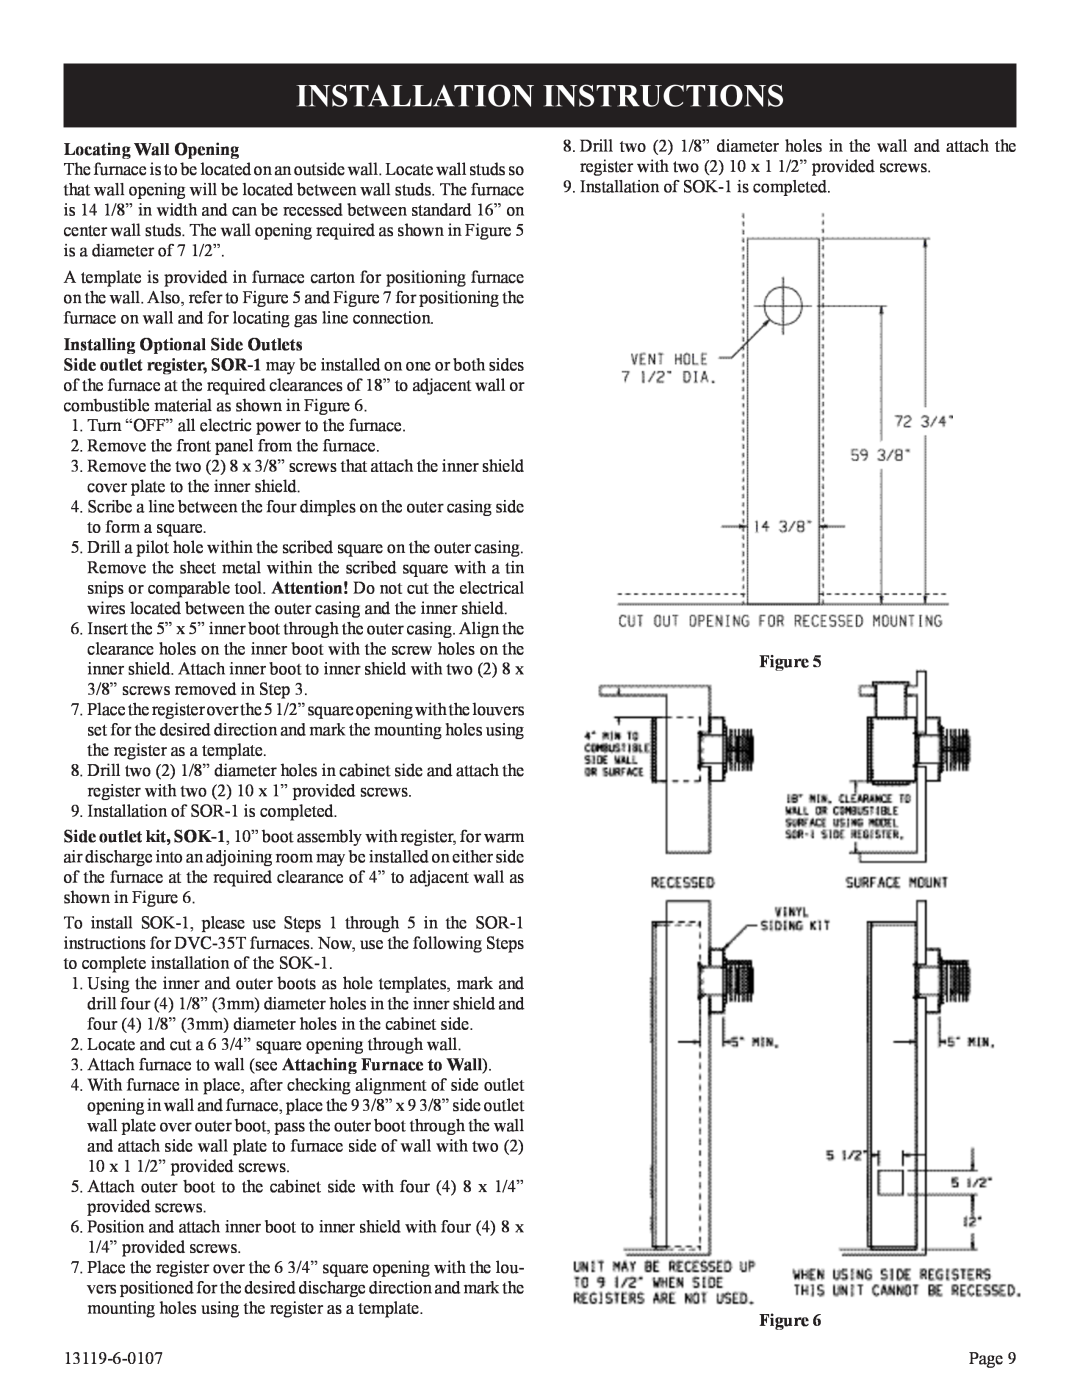 Empire Products DVC-35T-1, DVC-35IPT-1 Installation Instructions, Locating Wall Opening, Installing Optional Side Outlets 